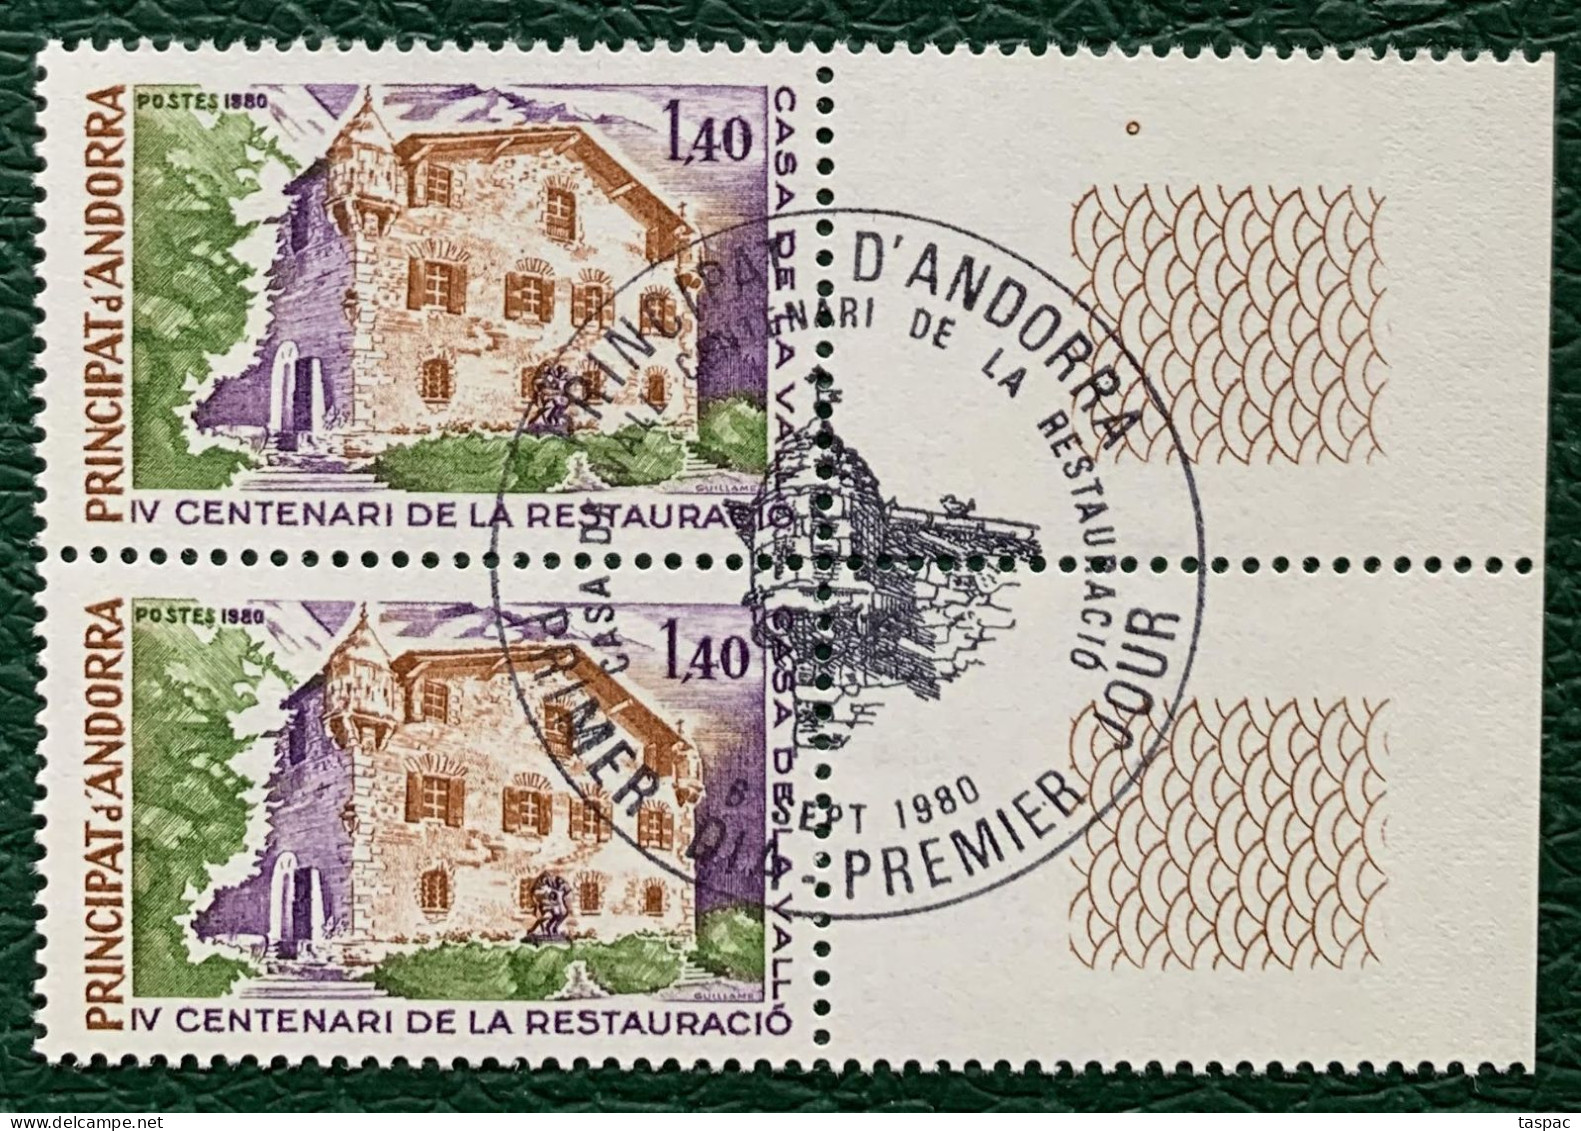 French Andorra 1980 Mi# 310 Used - Pair - De La Vall House, 400th Anniversary Of Restoration - Used Stamps